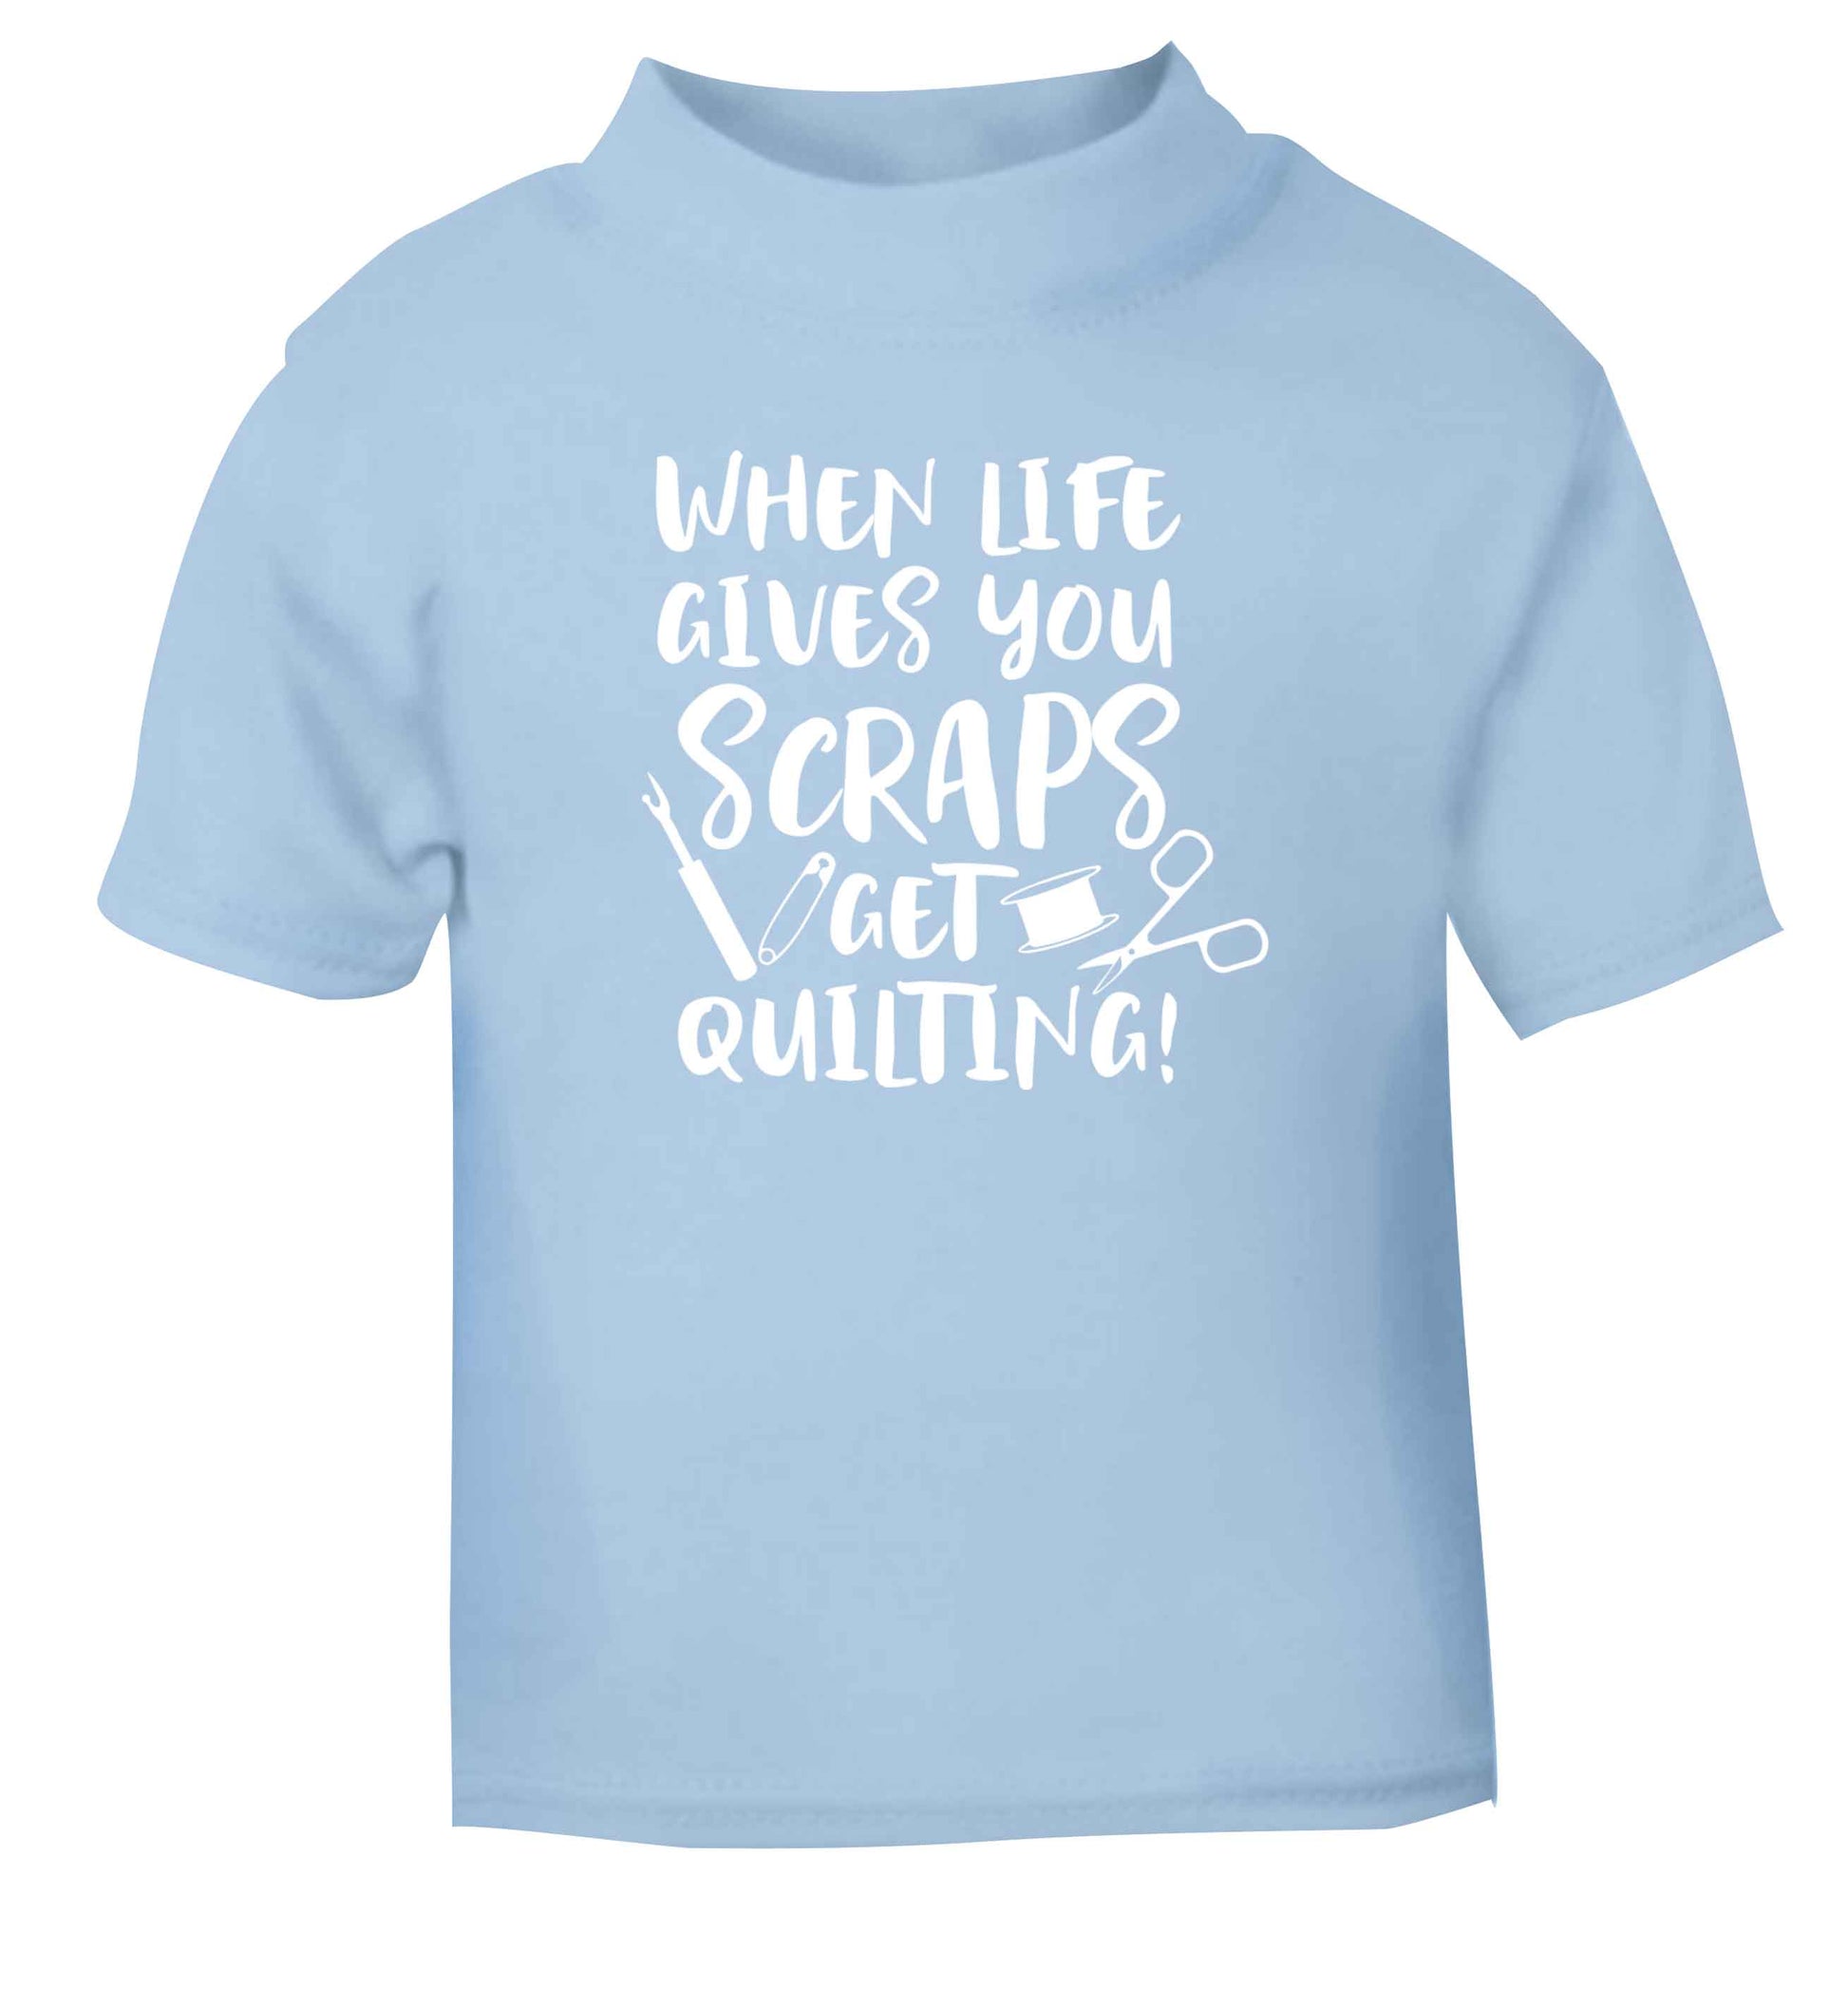 When life gives you scraps get quilting! light blue Baby Toddler Tshirt 2 Years